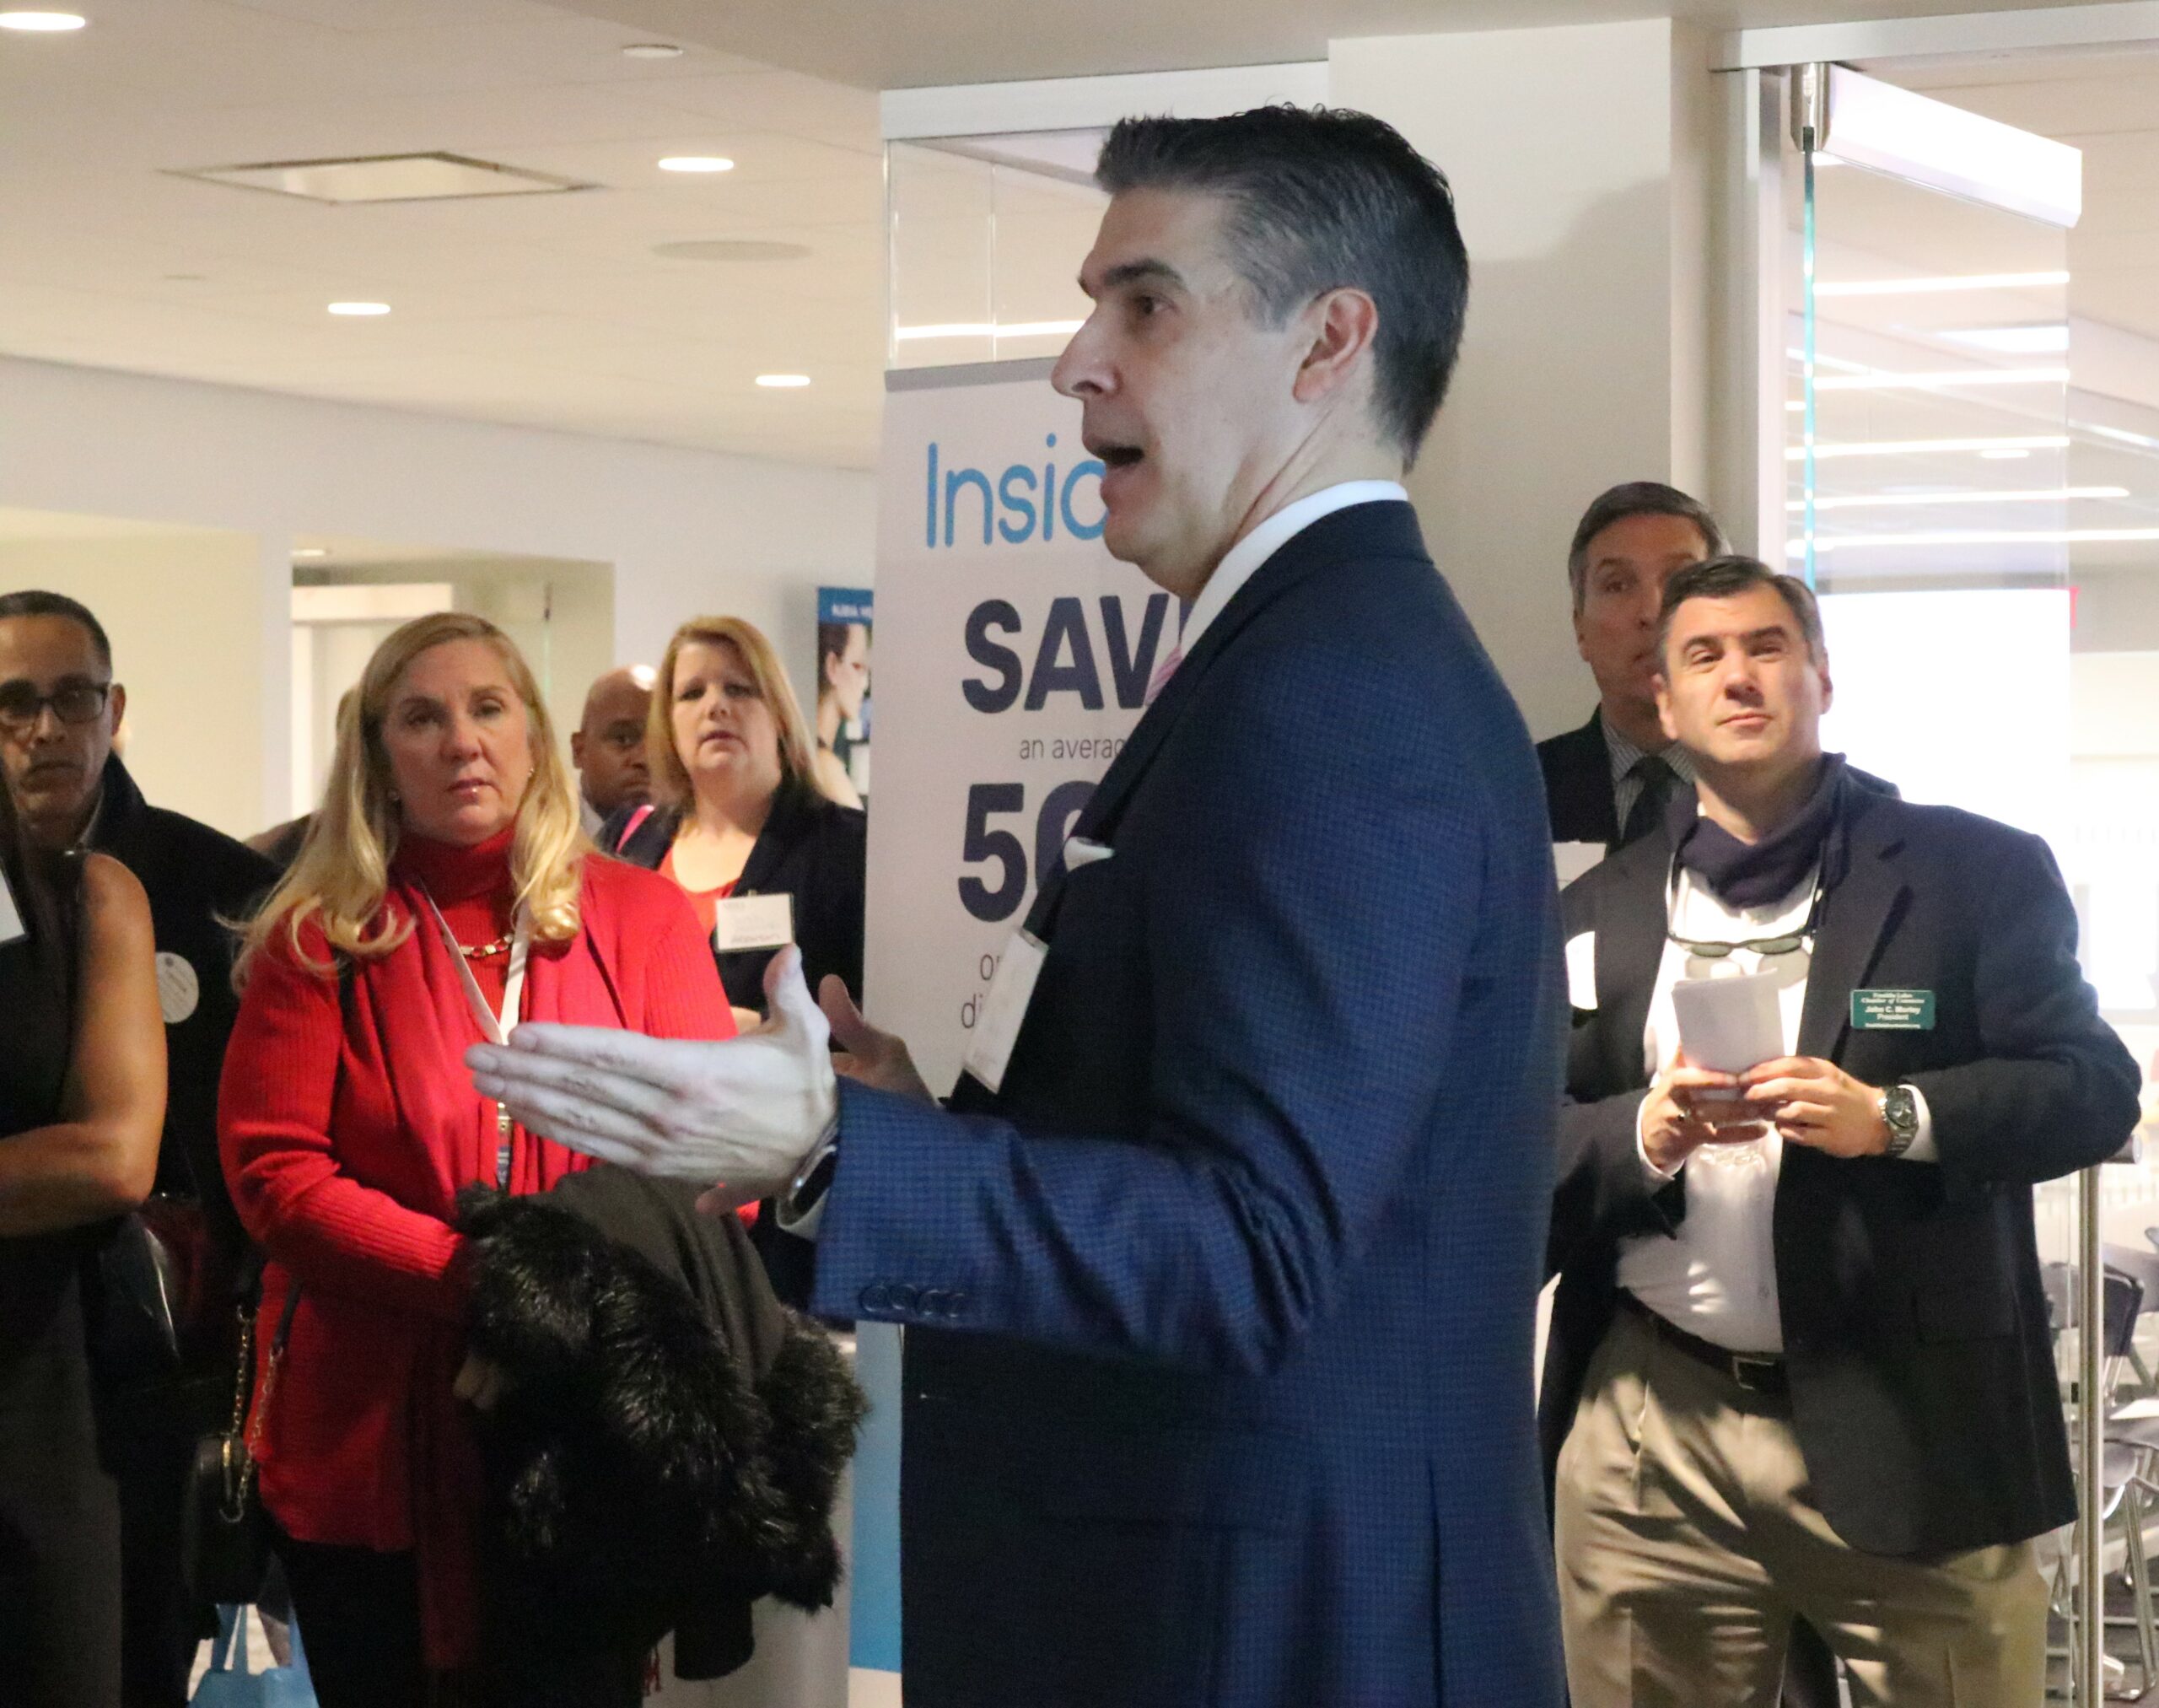 Al DeCarlo, Express Scripts’ director of Clinical Product Analytics – Knowledge Solutions, speaking at NJBIA's Holiday Networking event